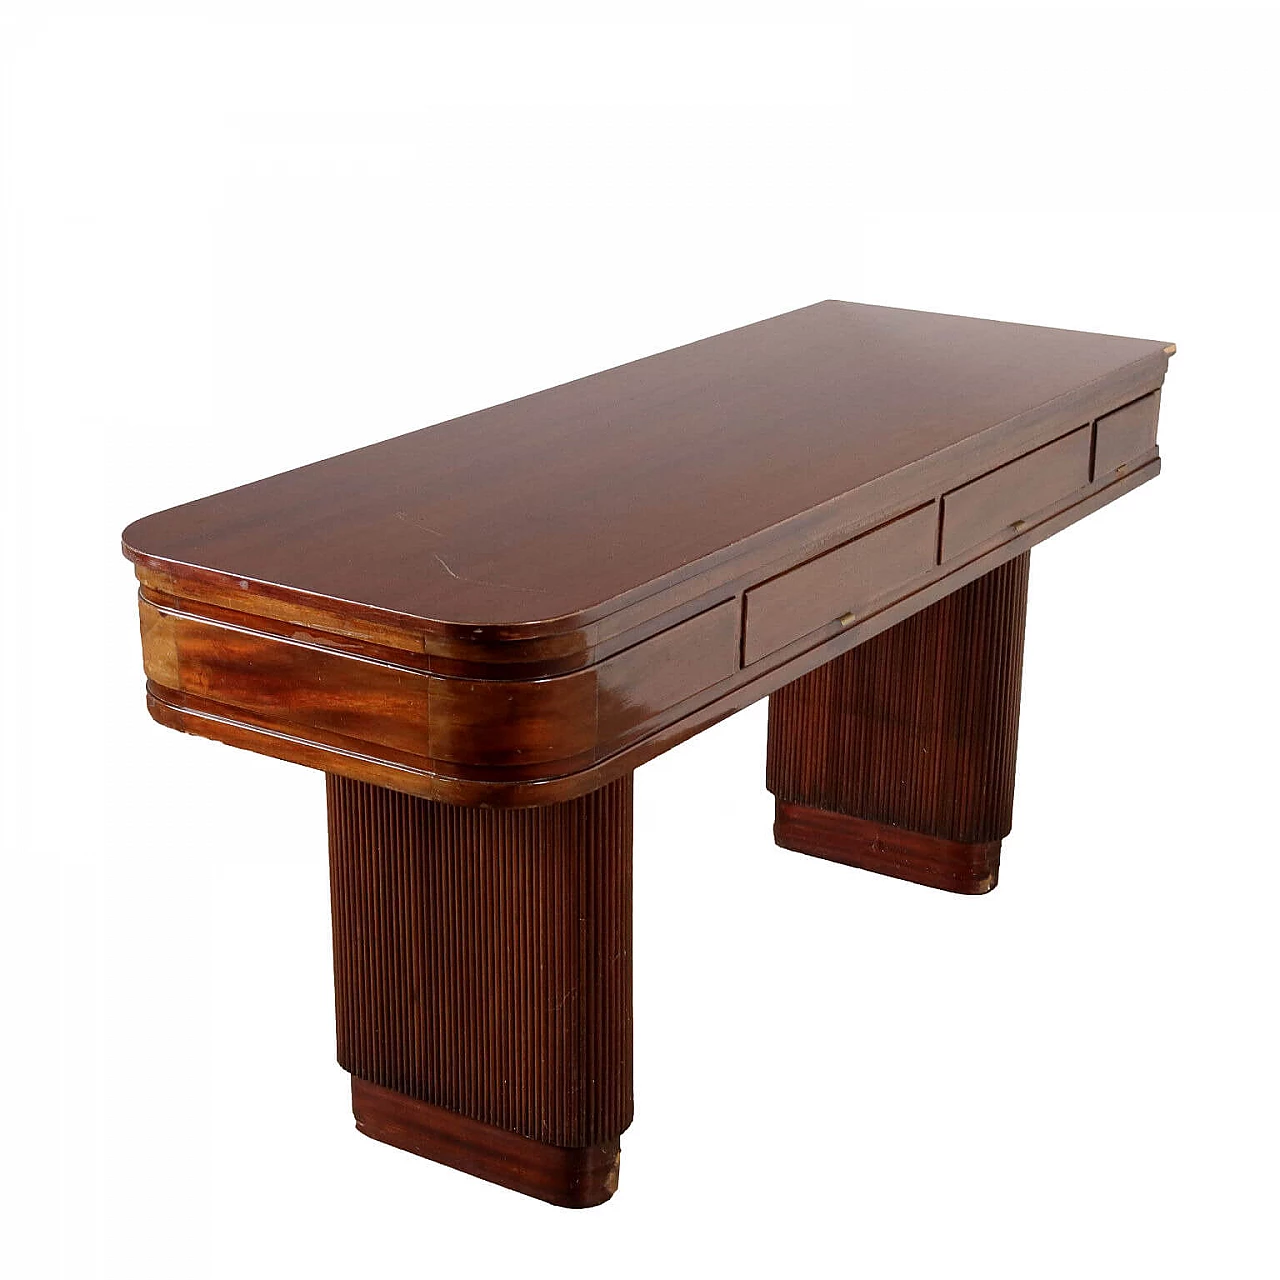 Mahogany veneered wooden shop counter with grissinate legs, 1960s 1